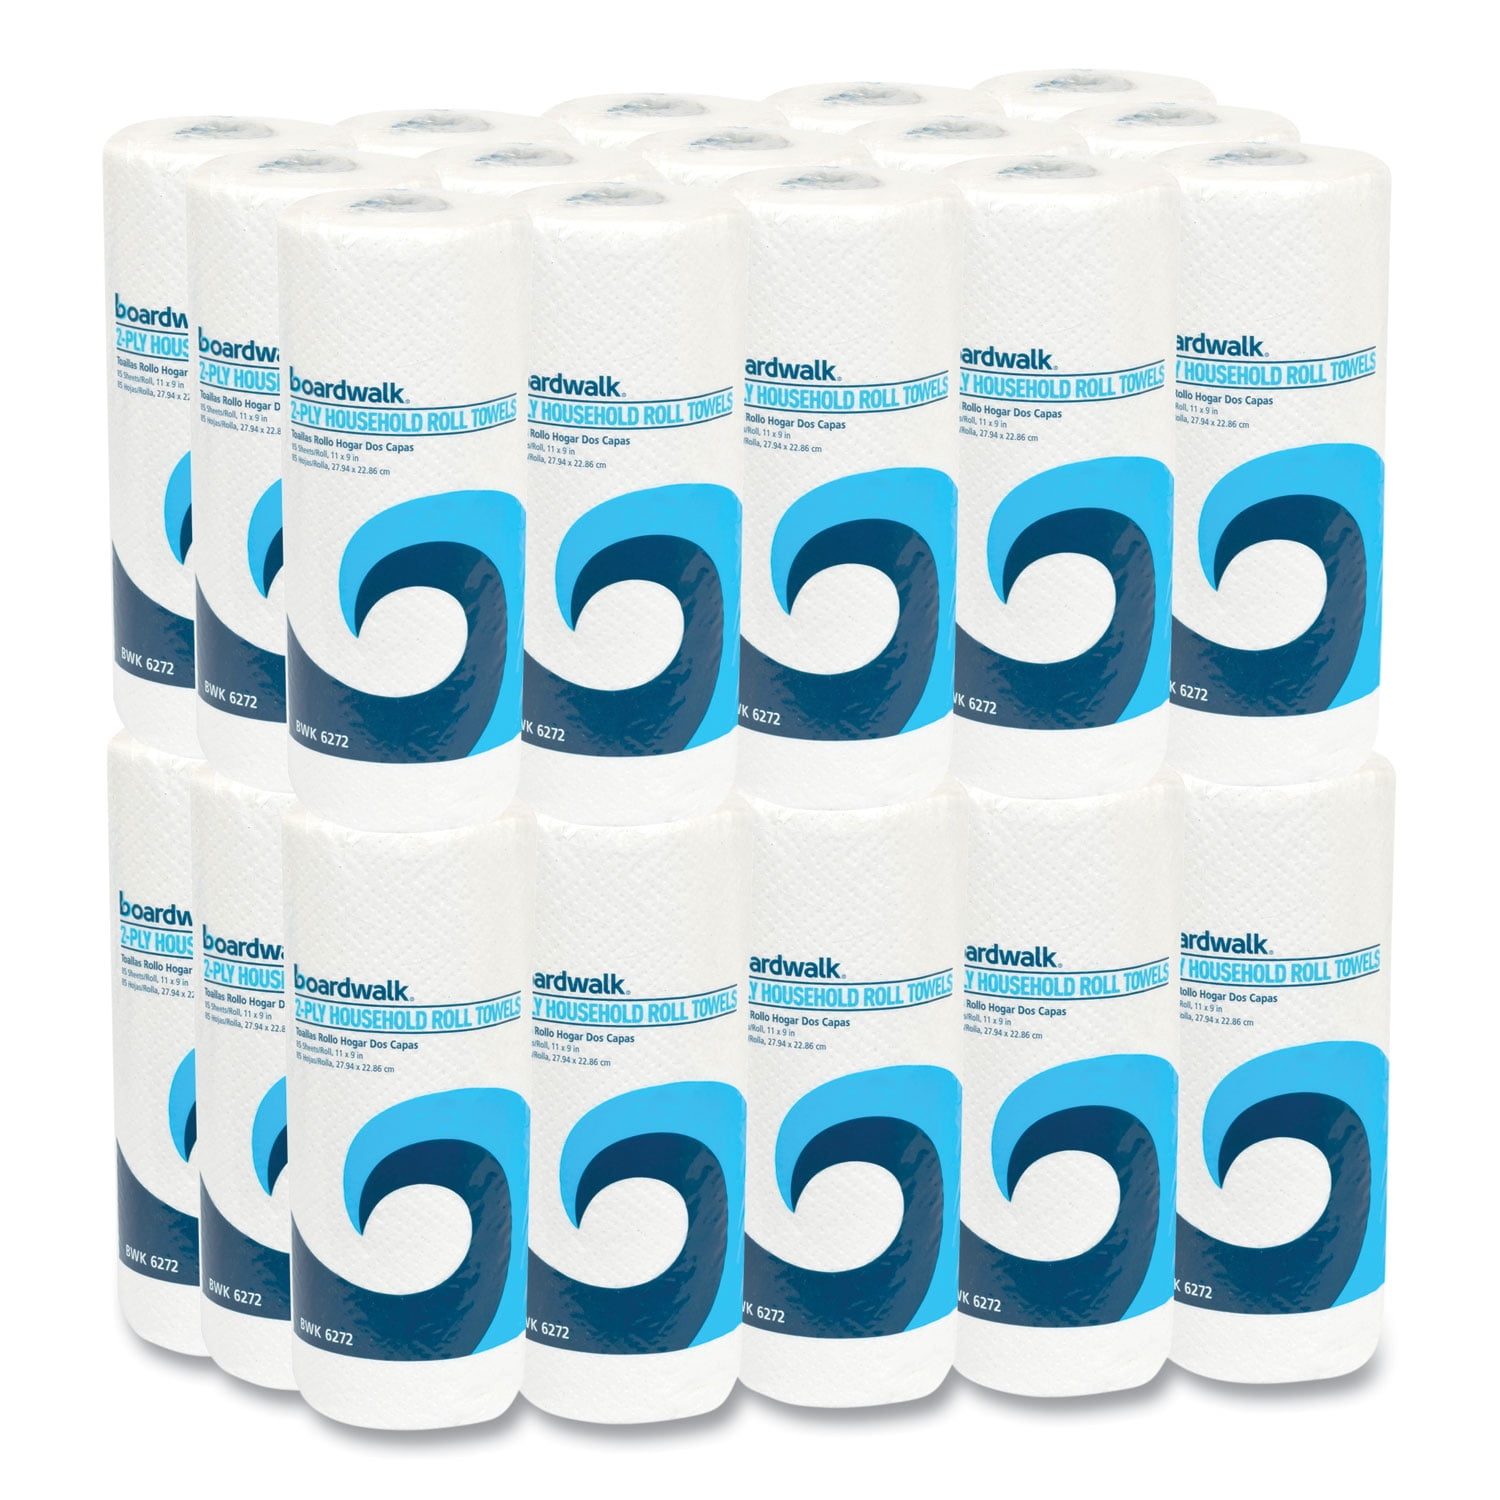 2-Ply 85 Sheets Per Roll 30 Rolls Perforated White Household Paper Towels 